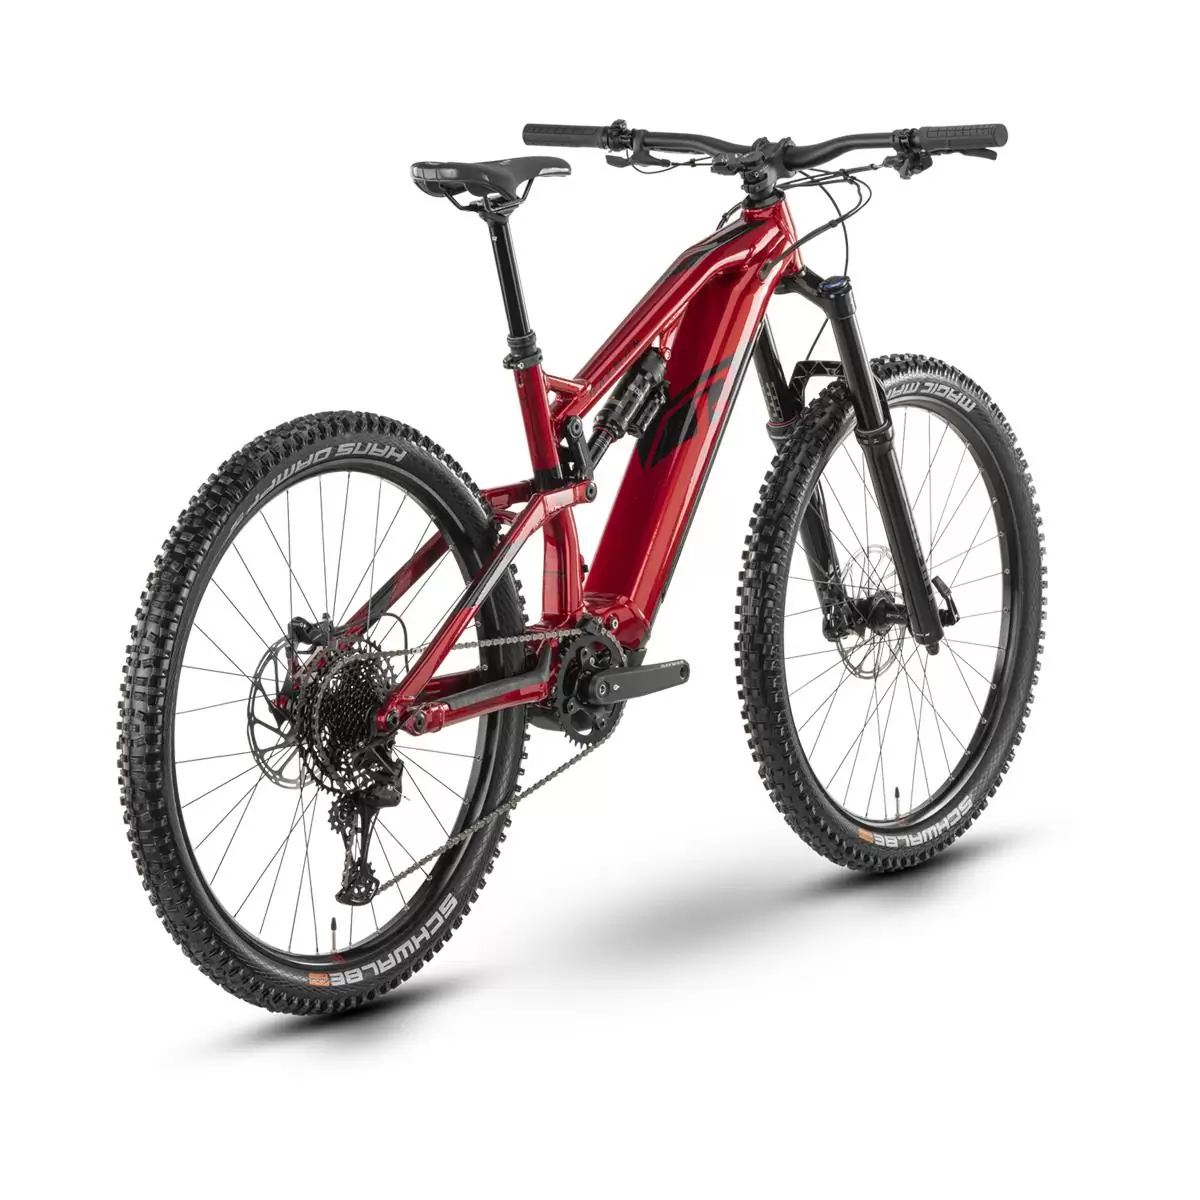 TrailRay 160E 10.0 29'' 170mm 12s 720Wh Yamaha PW-X3 Red/Black Size M #2